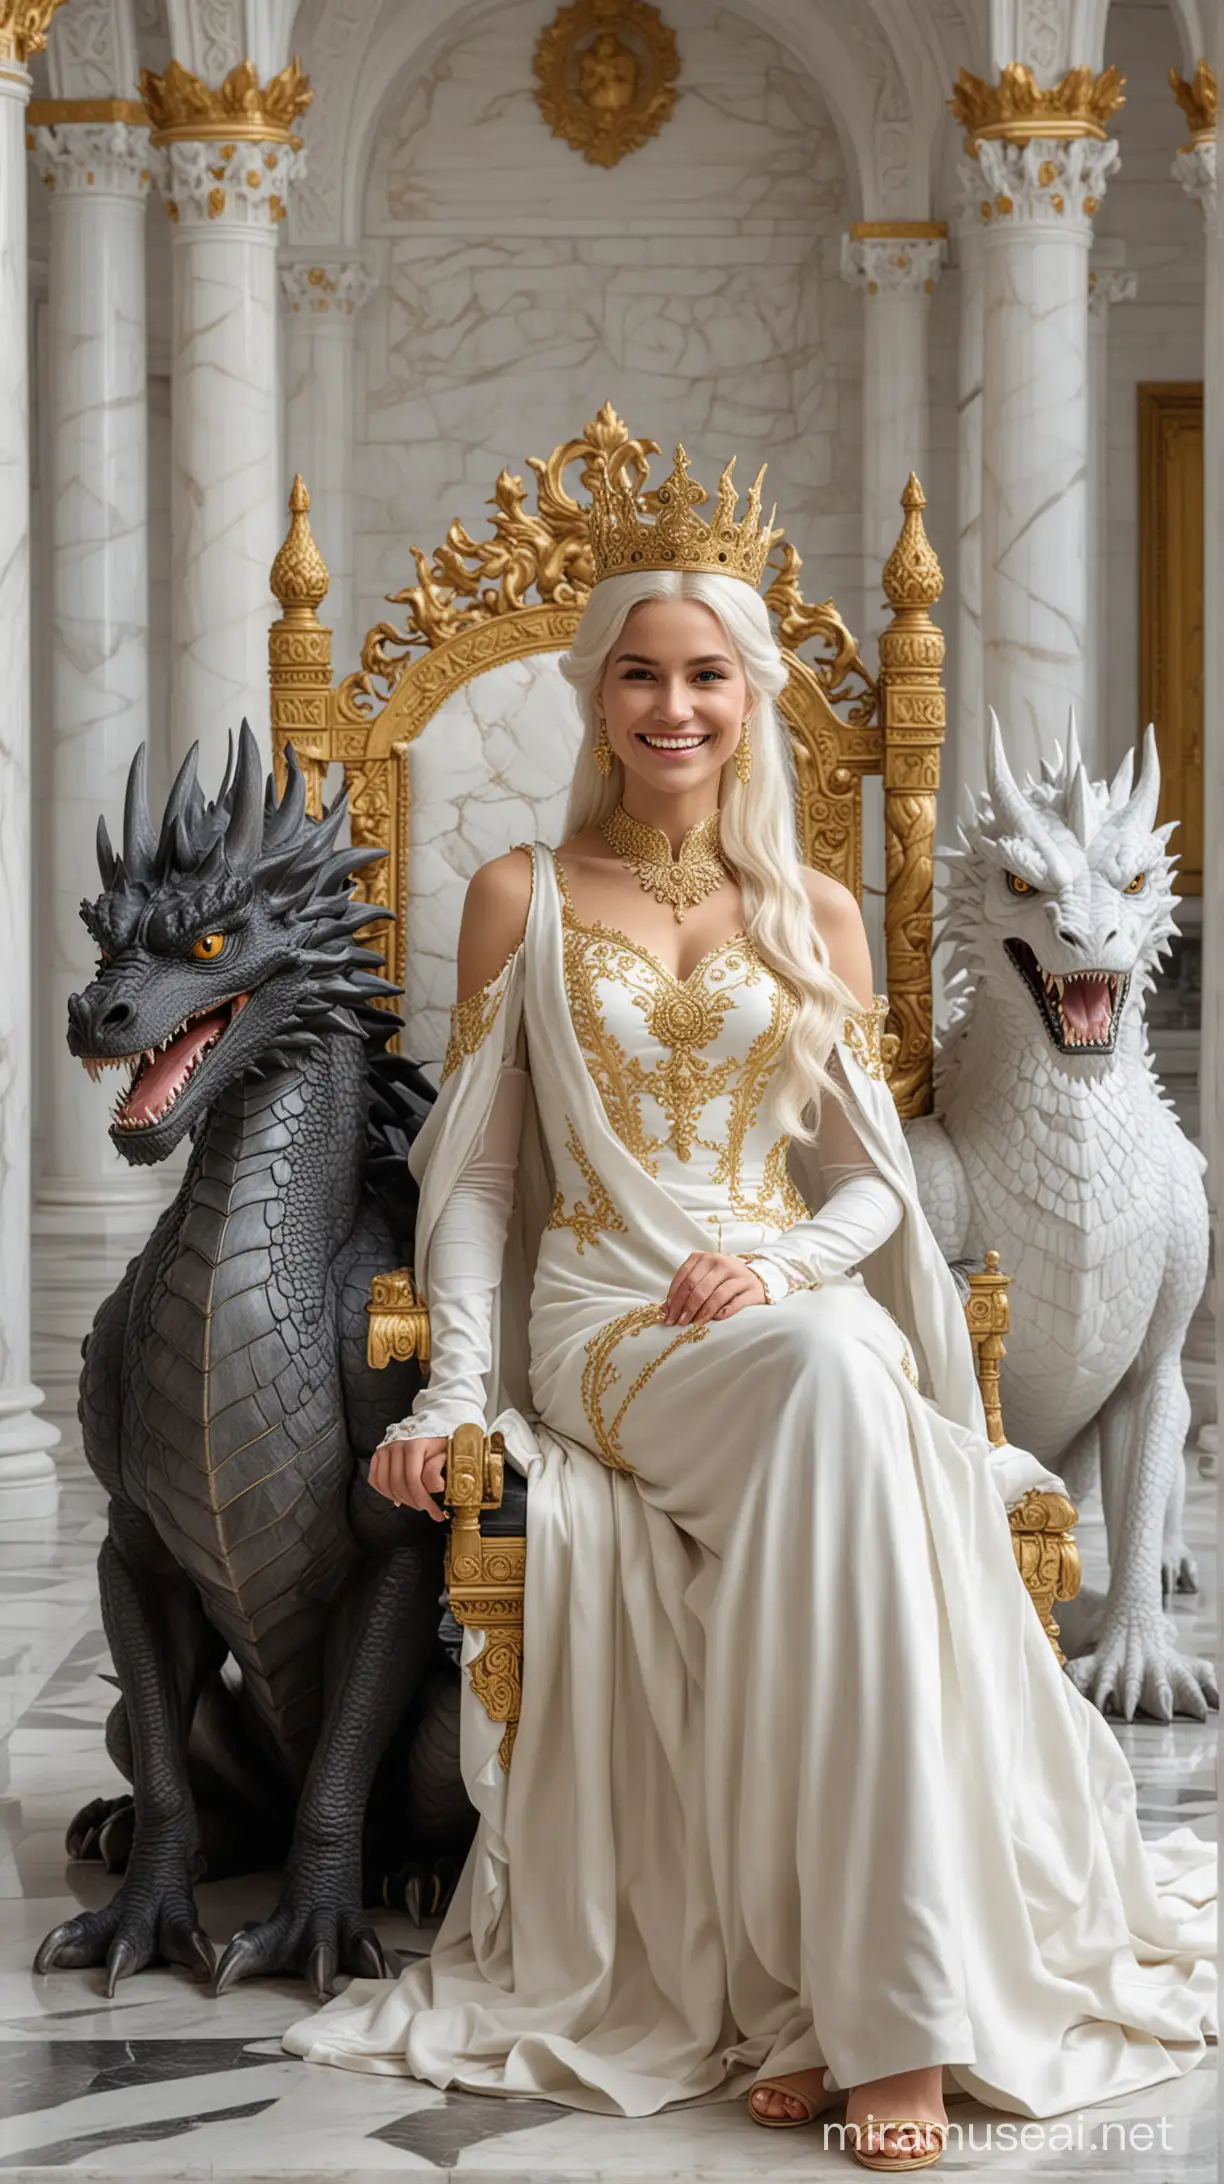 Regal Smiling Queen in Golden Dress with Dragon Guards